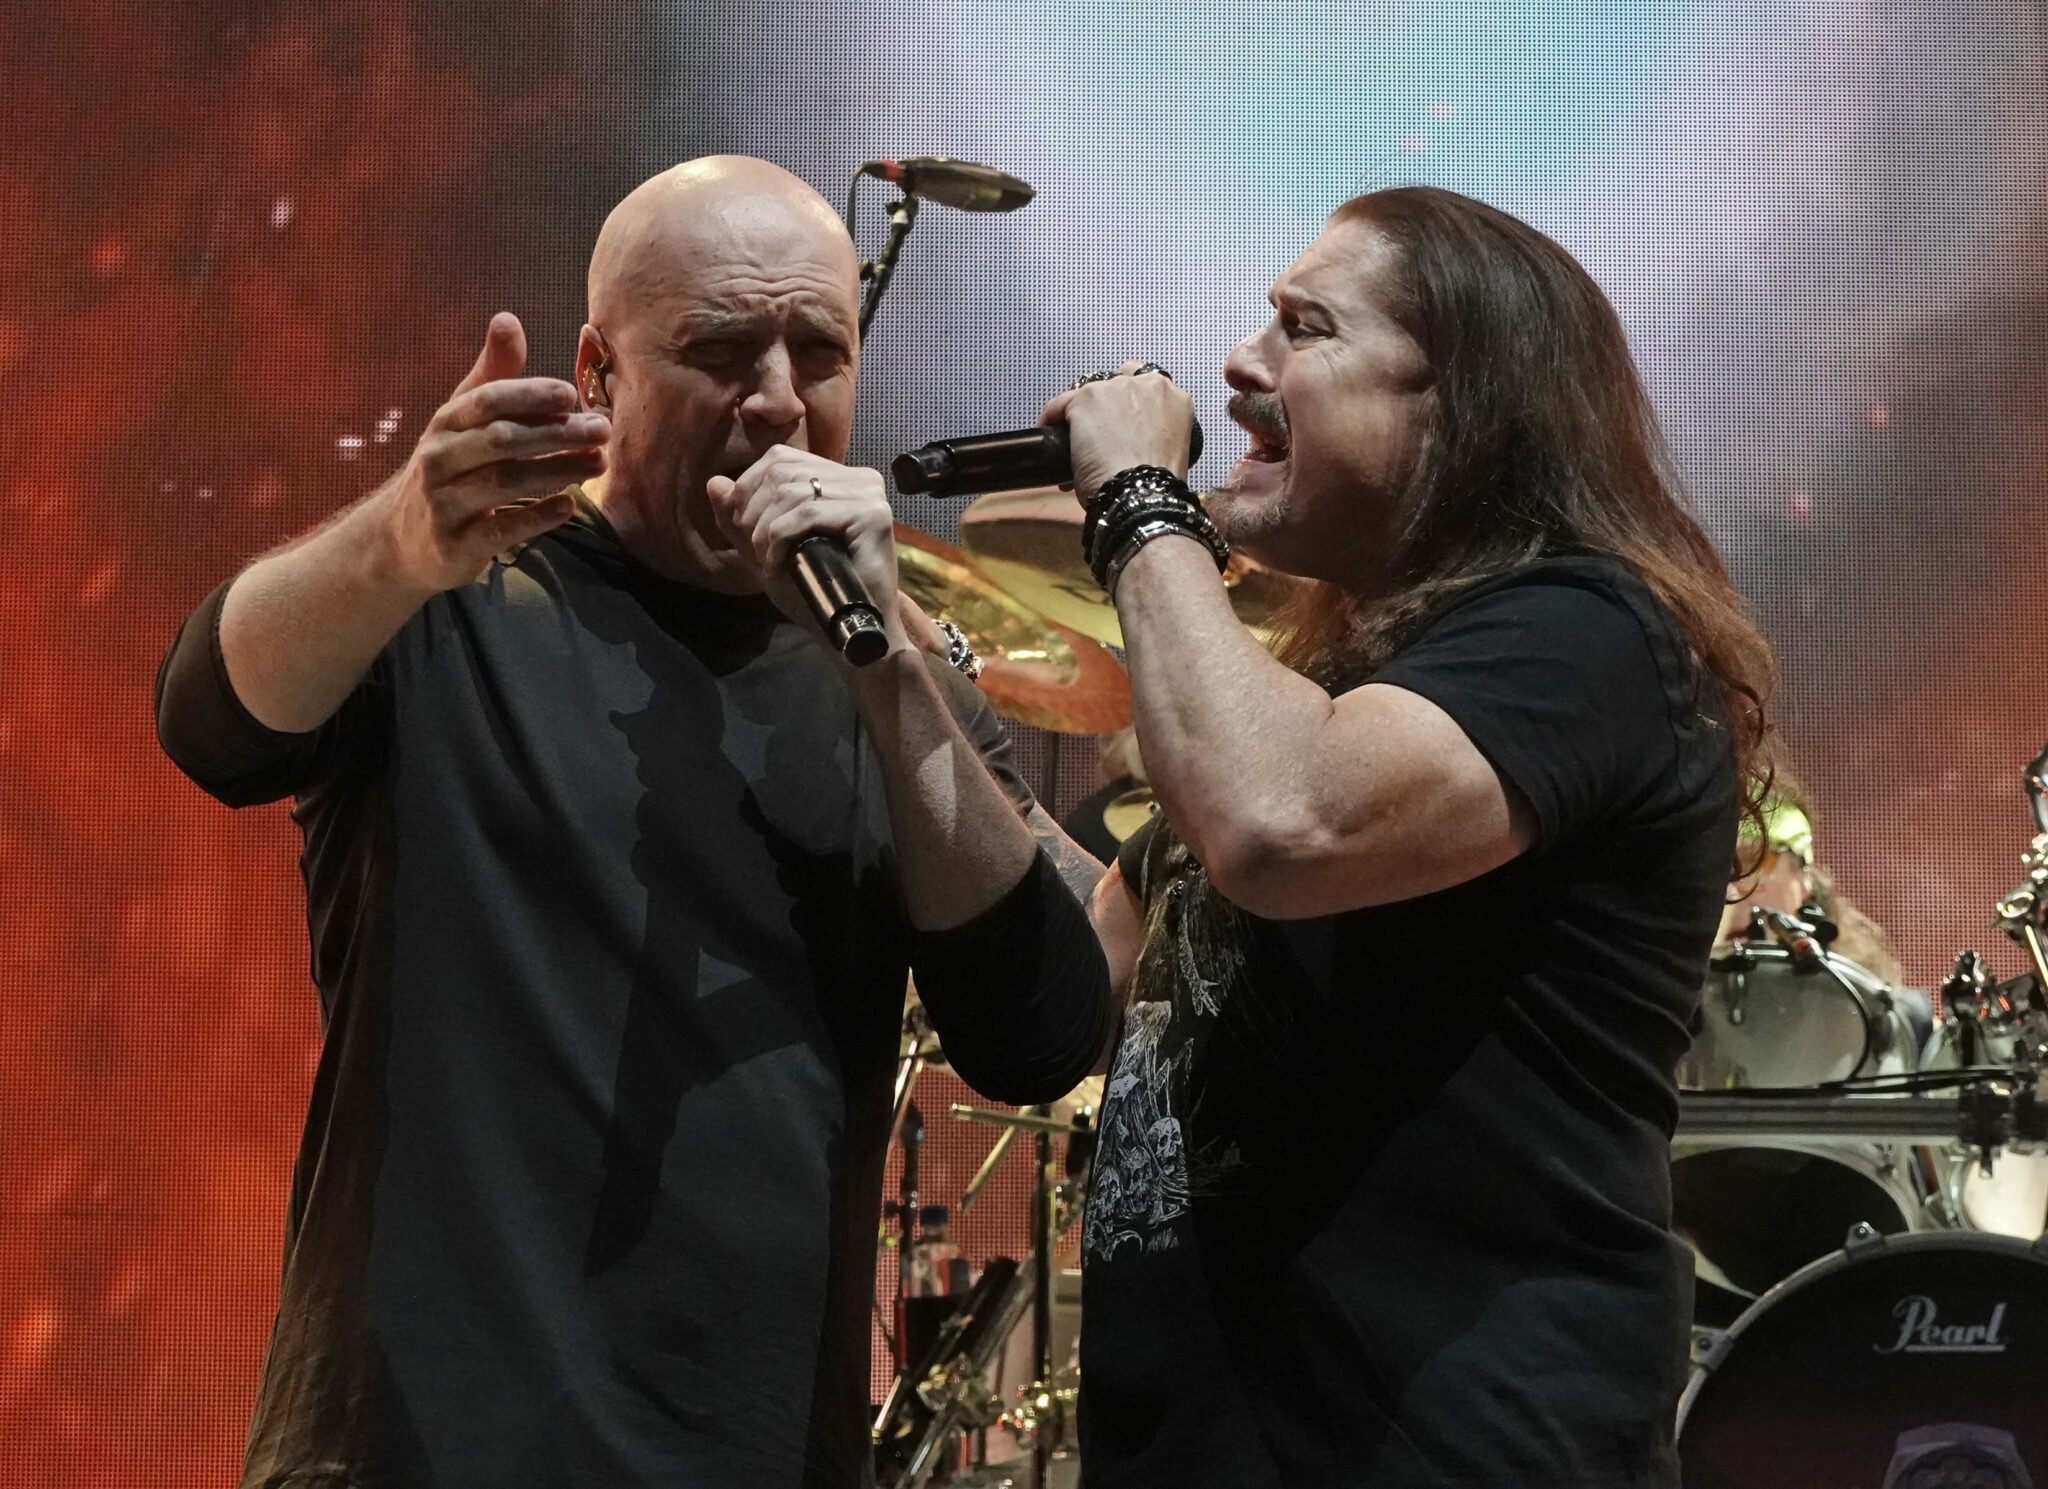 Concert Review Dreamsonic 2023 with Dream Theater, Devin Townsend